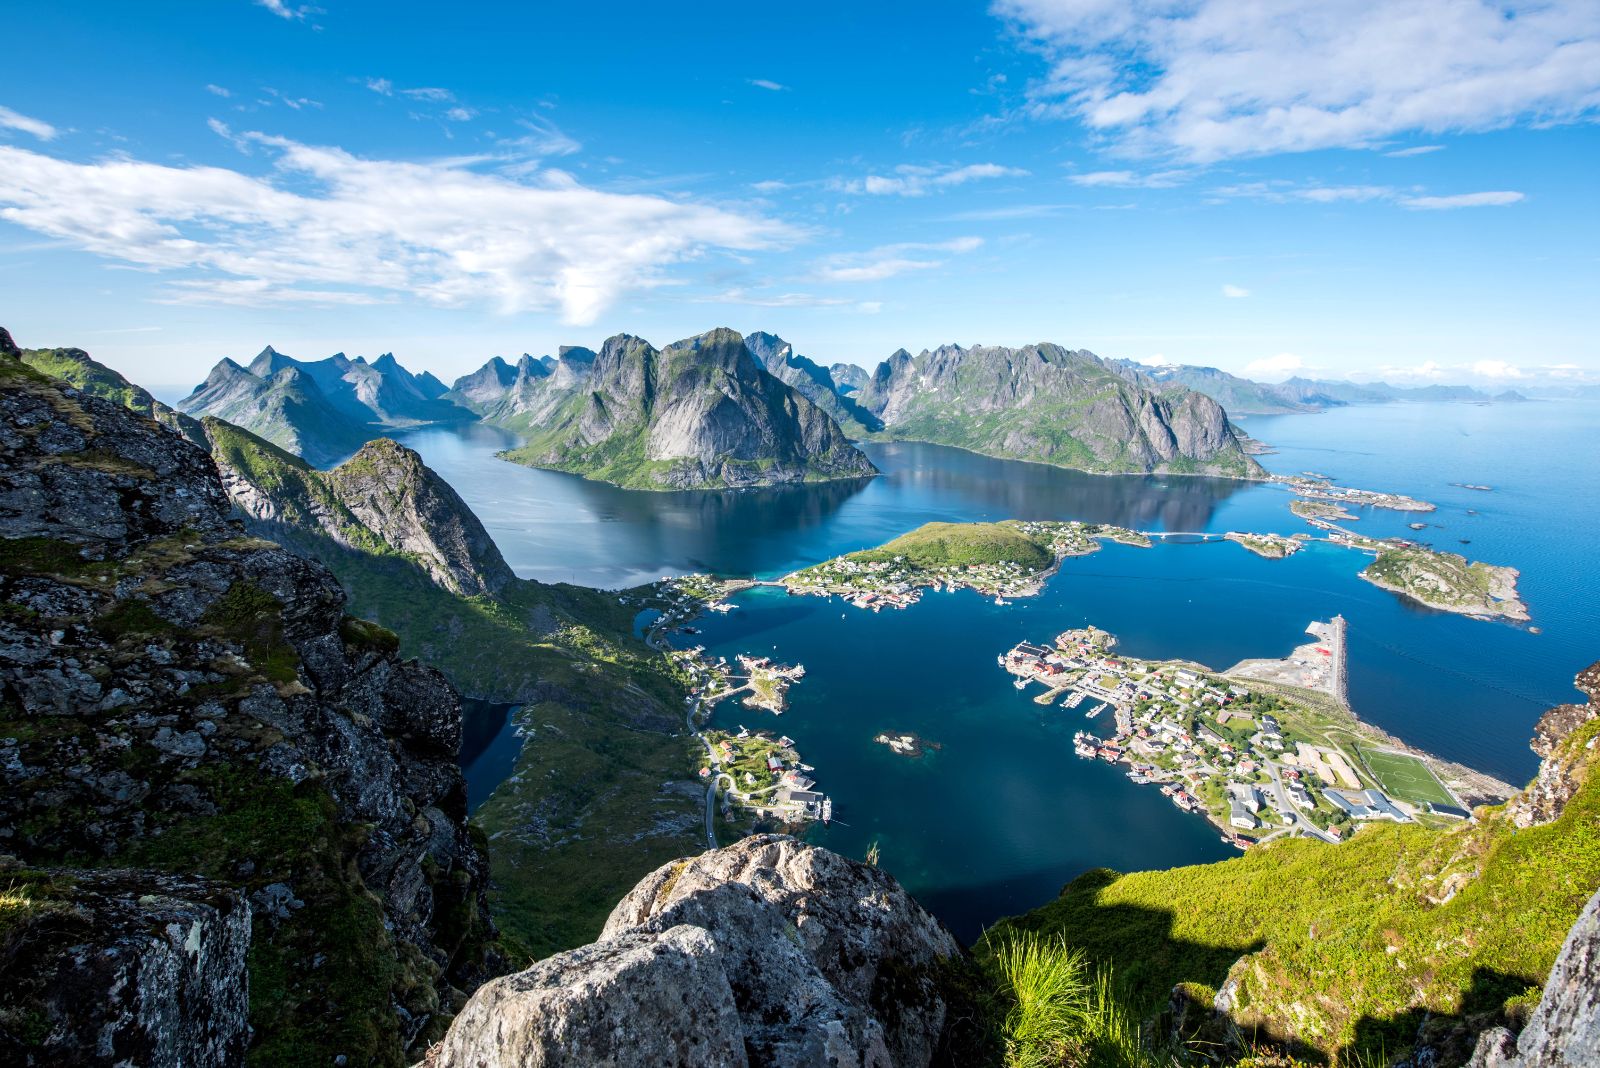 View from a high altitude in the Lofoten Islands (Credit: Tomasz Furmanek - VisitNorway)